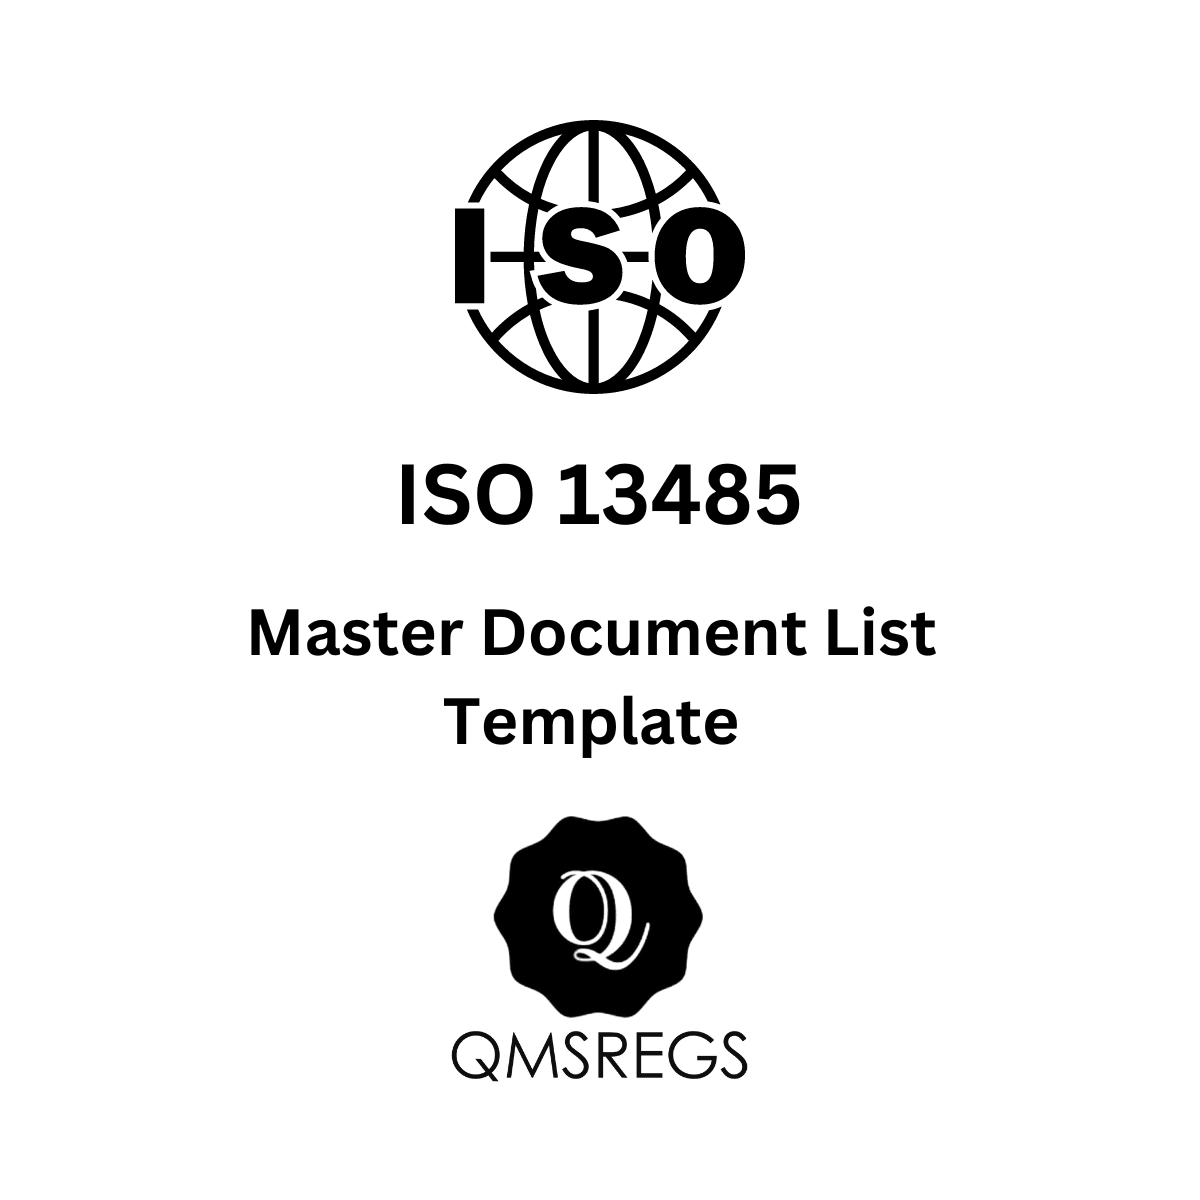 ISO 13485 Master Document List Template